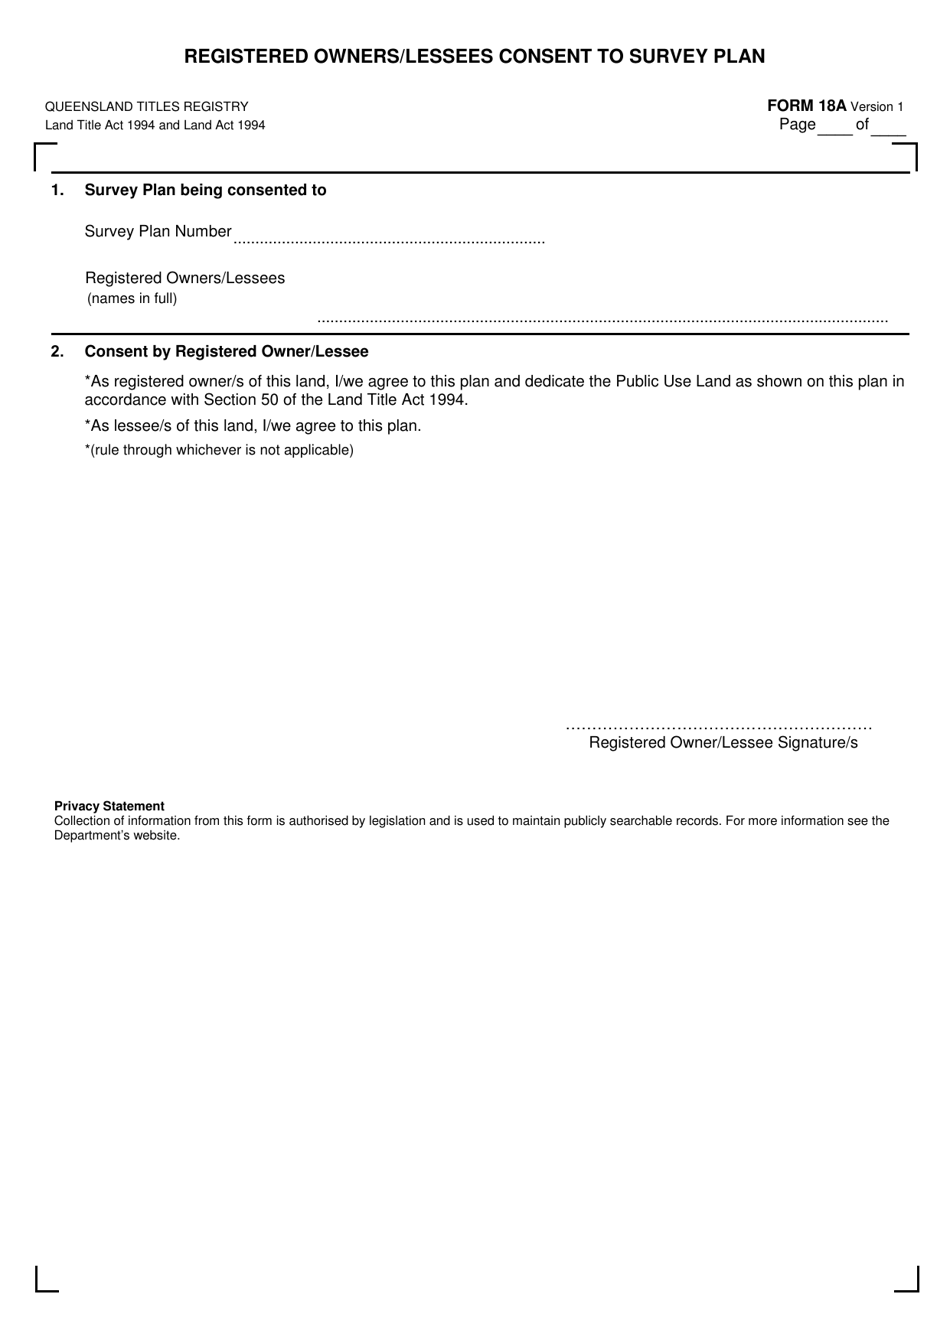 Form 18A Registered Owners / Lessees Consent to Survey Plan - Queensland, Australia, Page 1